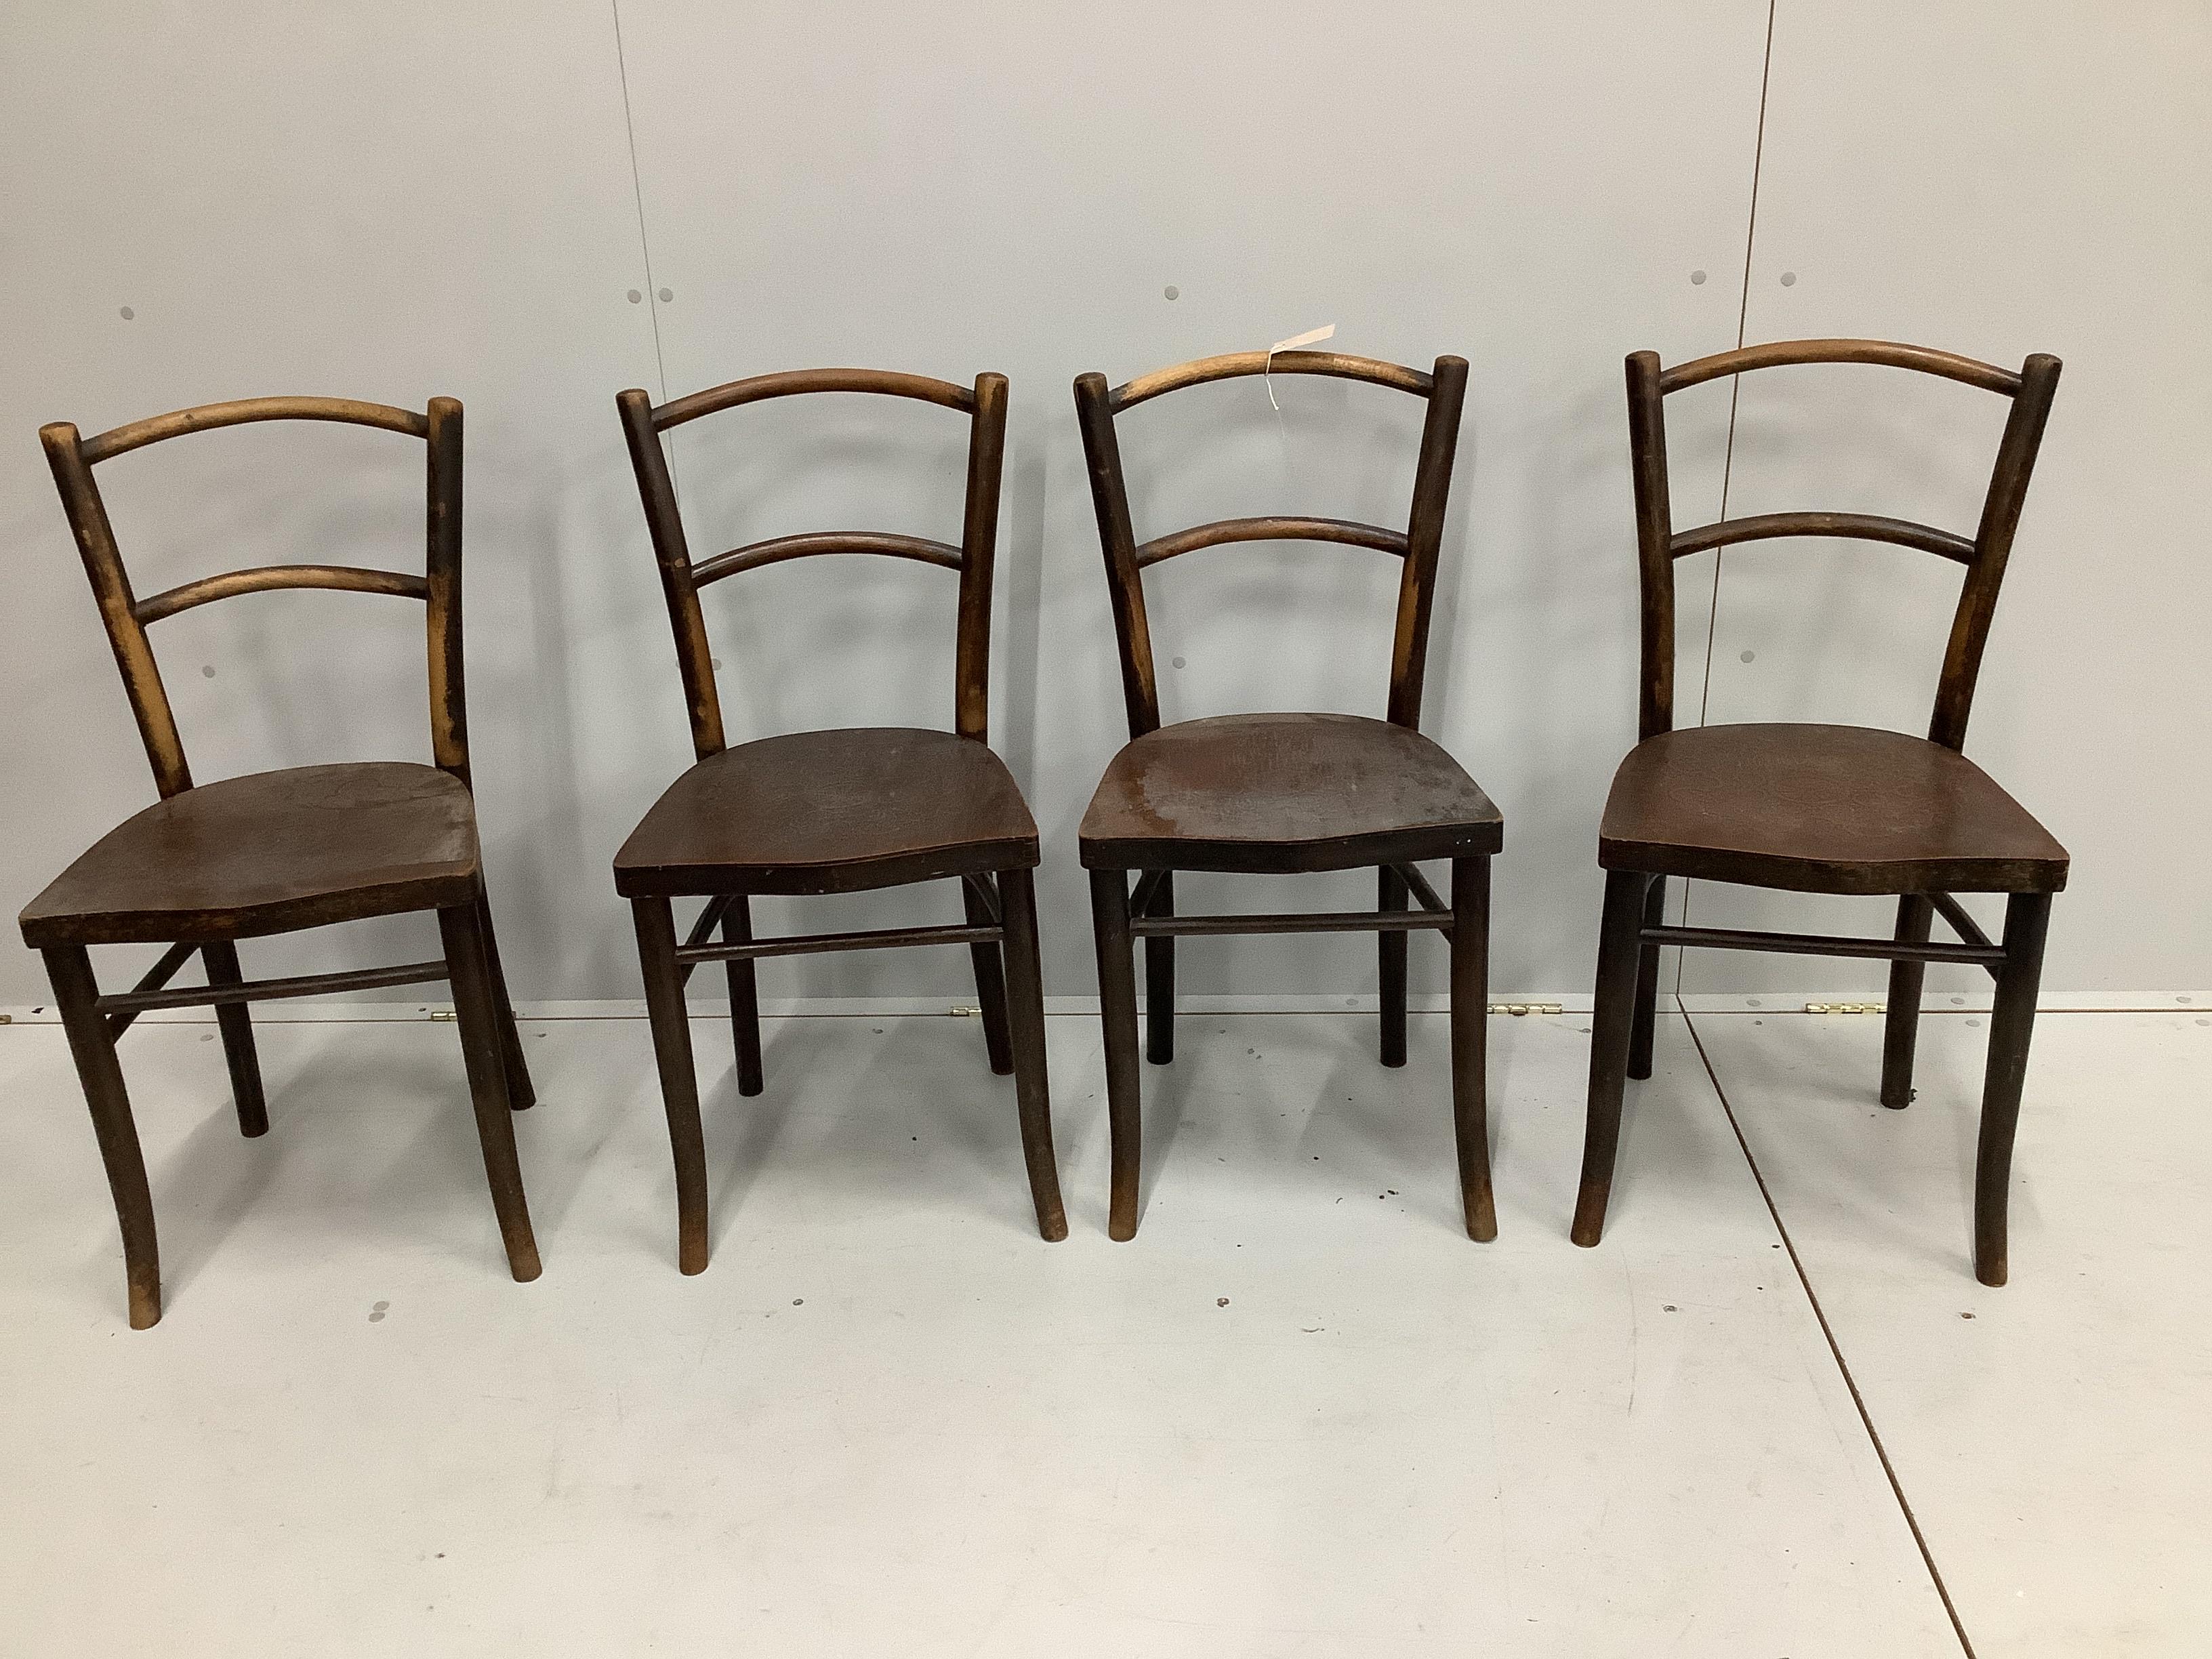 A set of four Polish Mundus bentwood dining chairs                                                                                                                                                                          